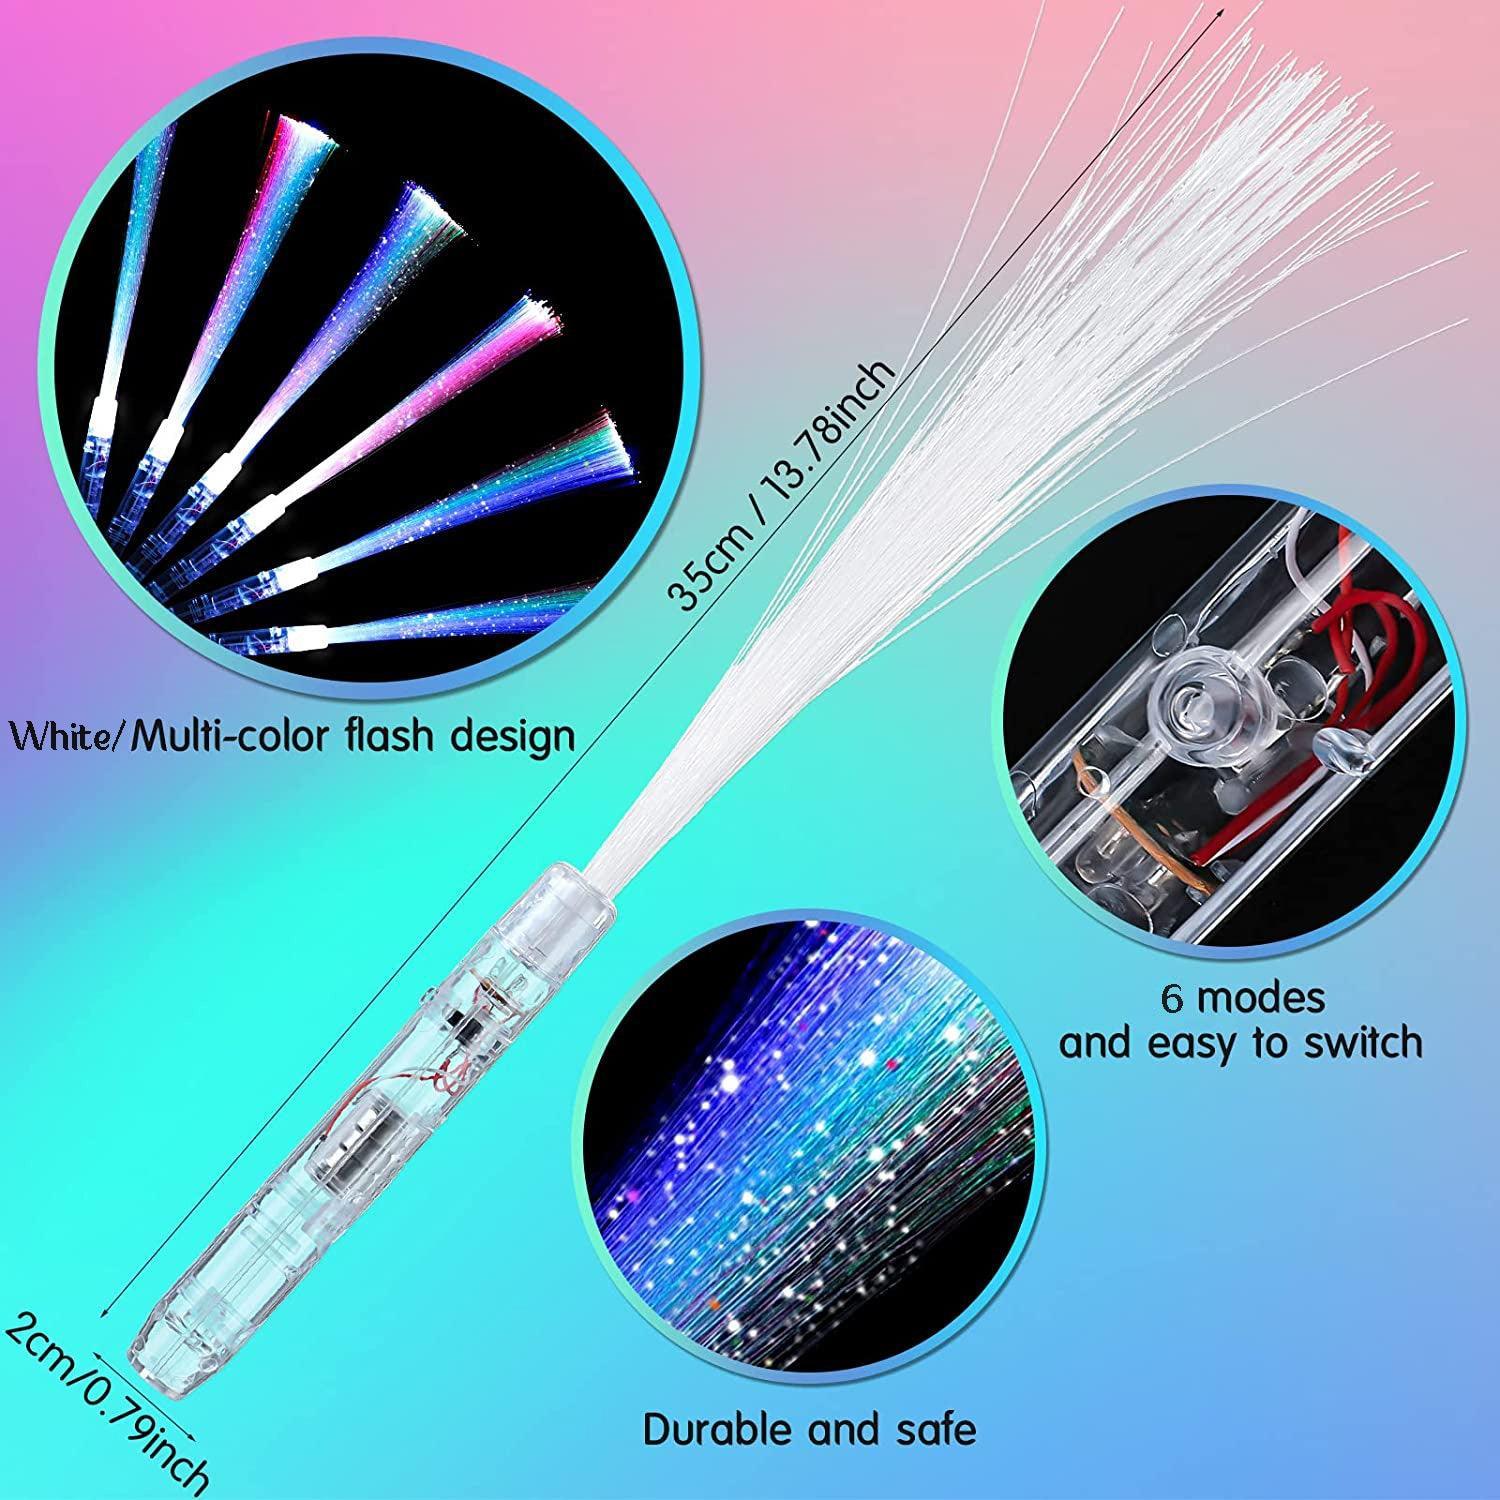 Lighted Fiber Optic Wands for Wedding Send off ideas for Your Wedding Exit - Lasercutwraps Shop